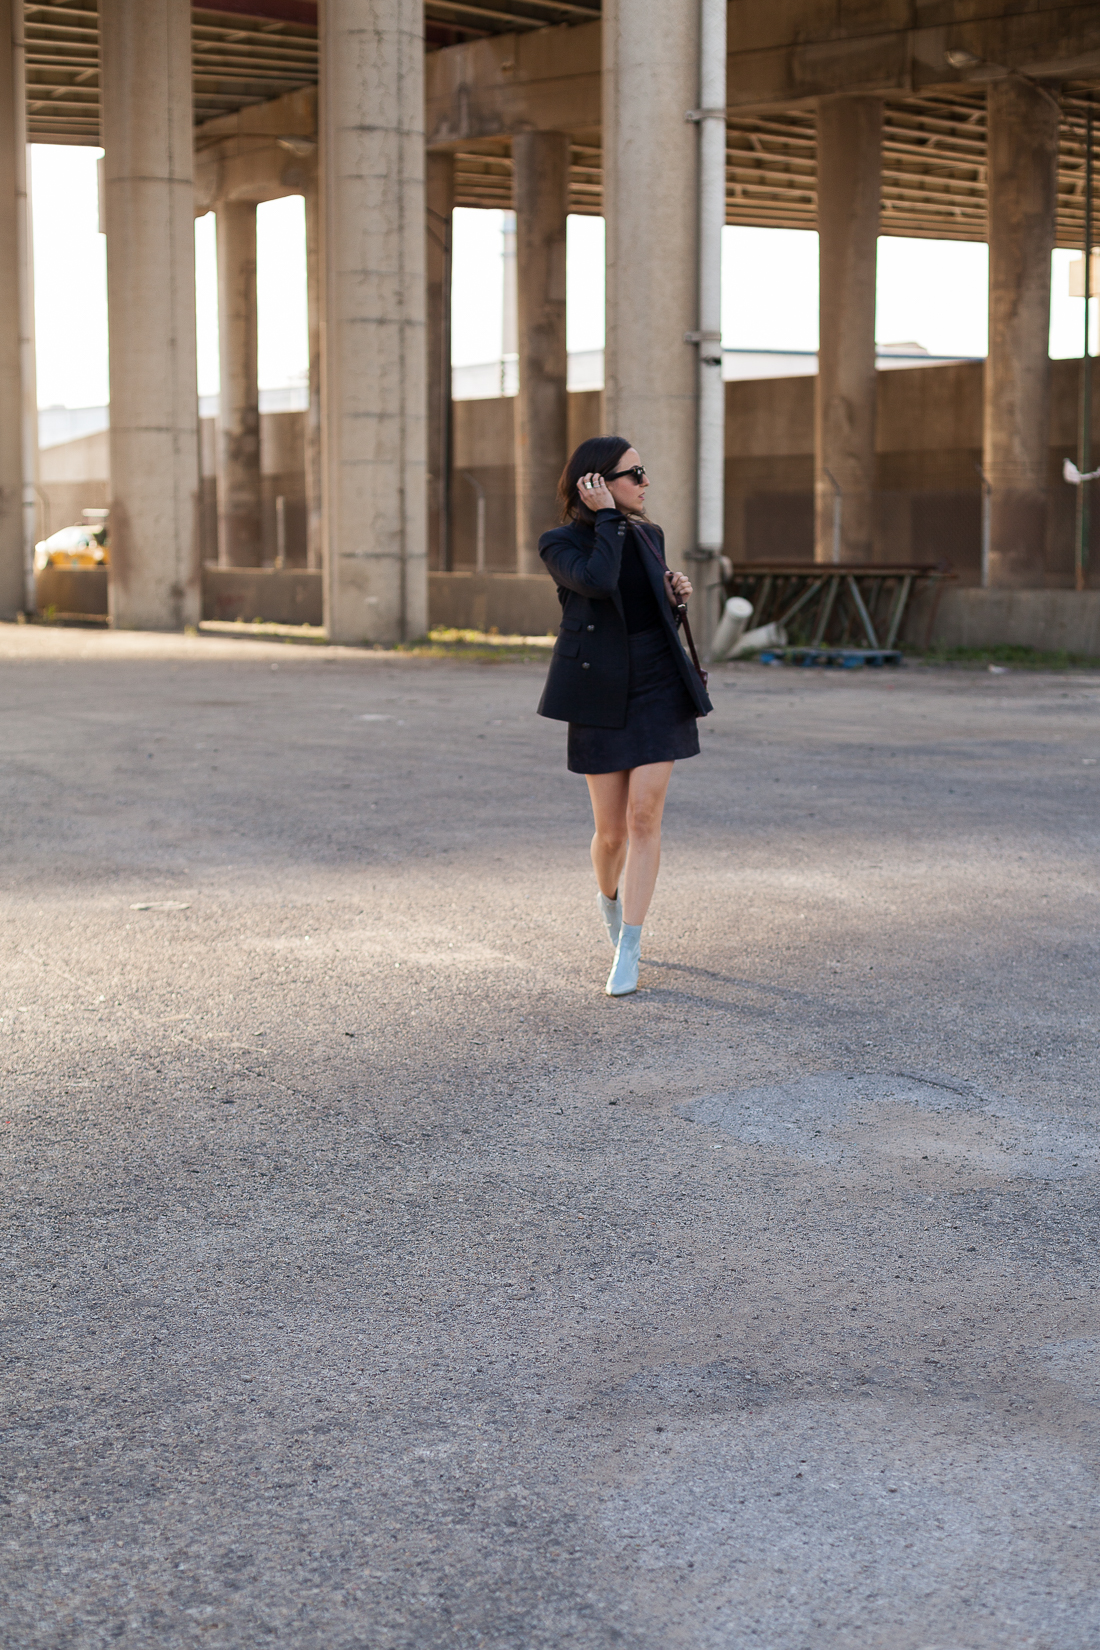 Yana Frigelis of NoMad Luxuries wearing a monochrome look in navy from theory and zara for Fall fashion